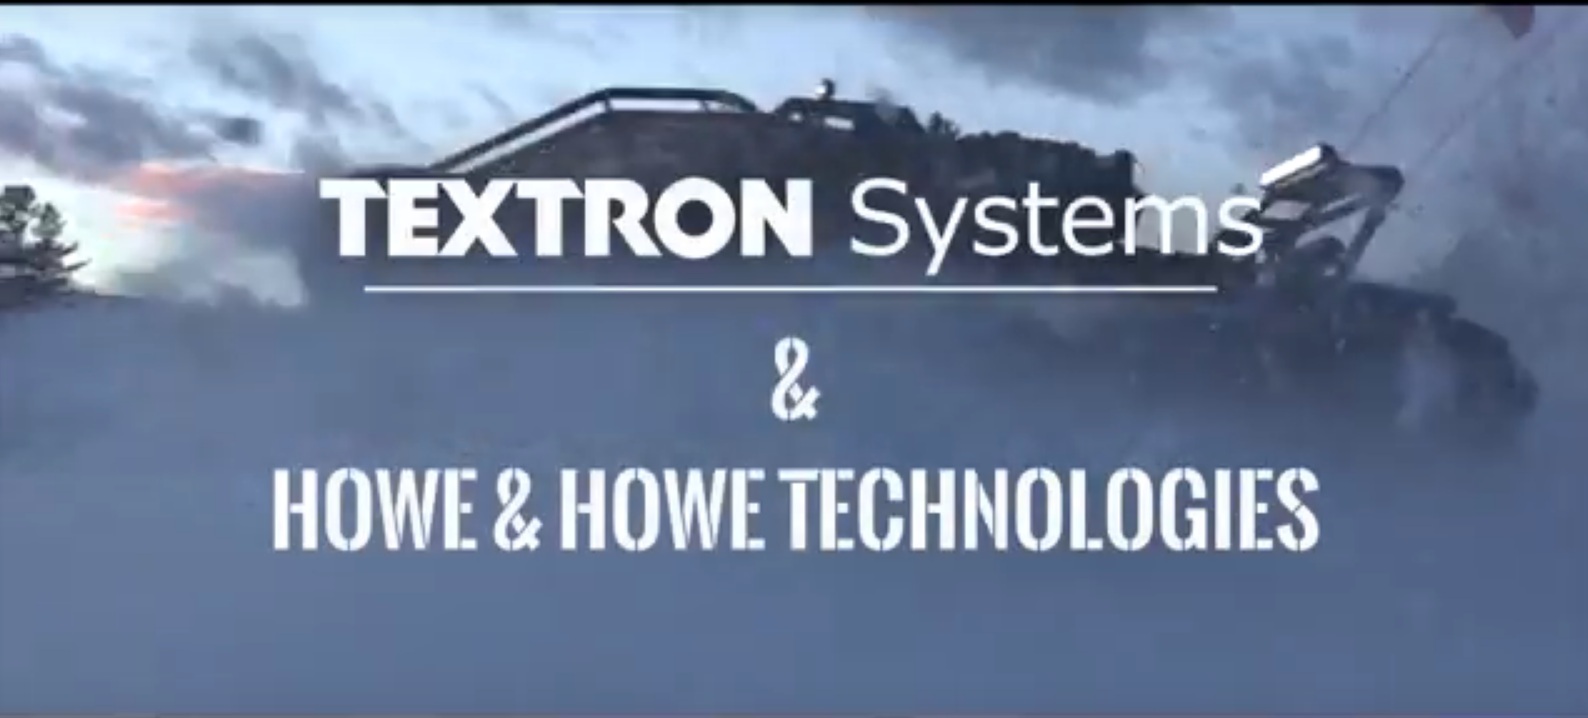 Textron Systems Plans to Acquire Howe & Howe Technologies